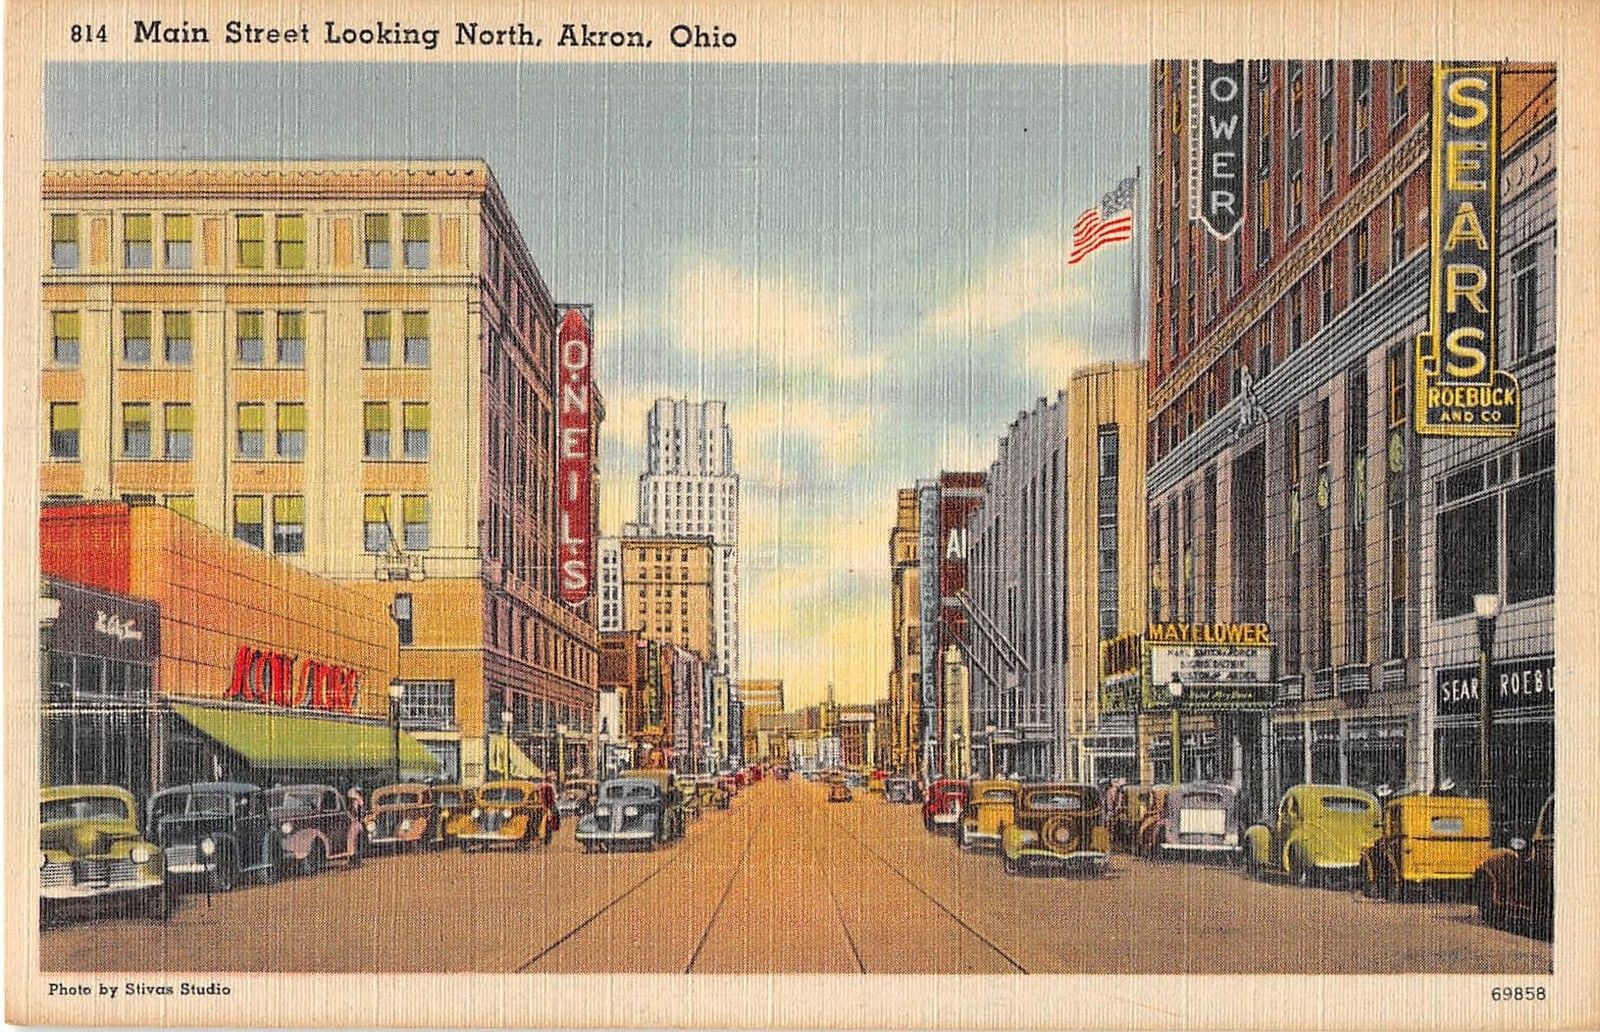 Mansfield, Ohio, Main Street looking south night | Vintage & Antique  Postcards 🗺 📷 🎠 | Send real postcards online